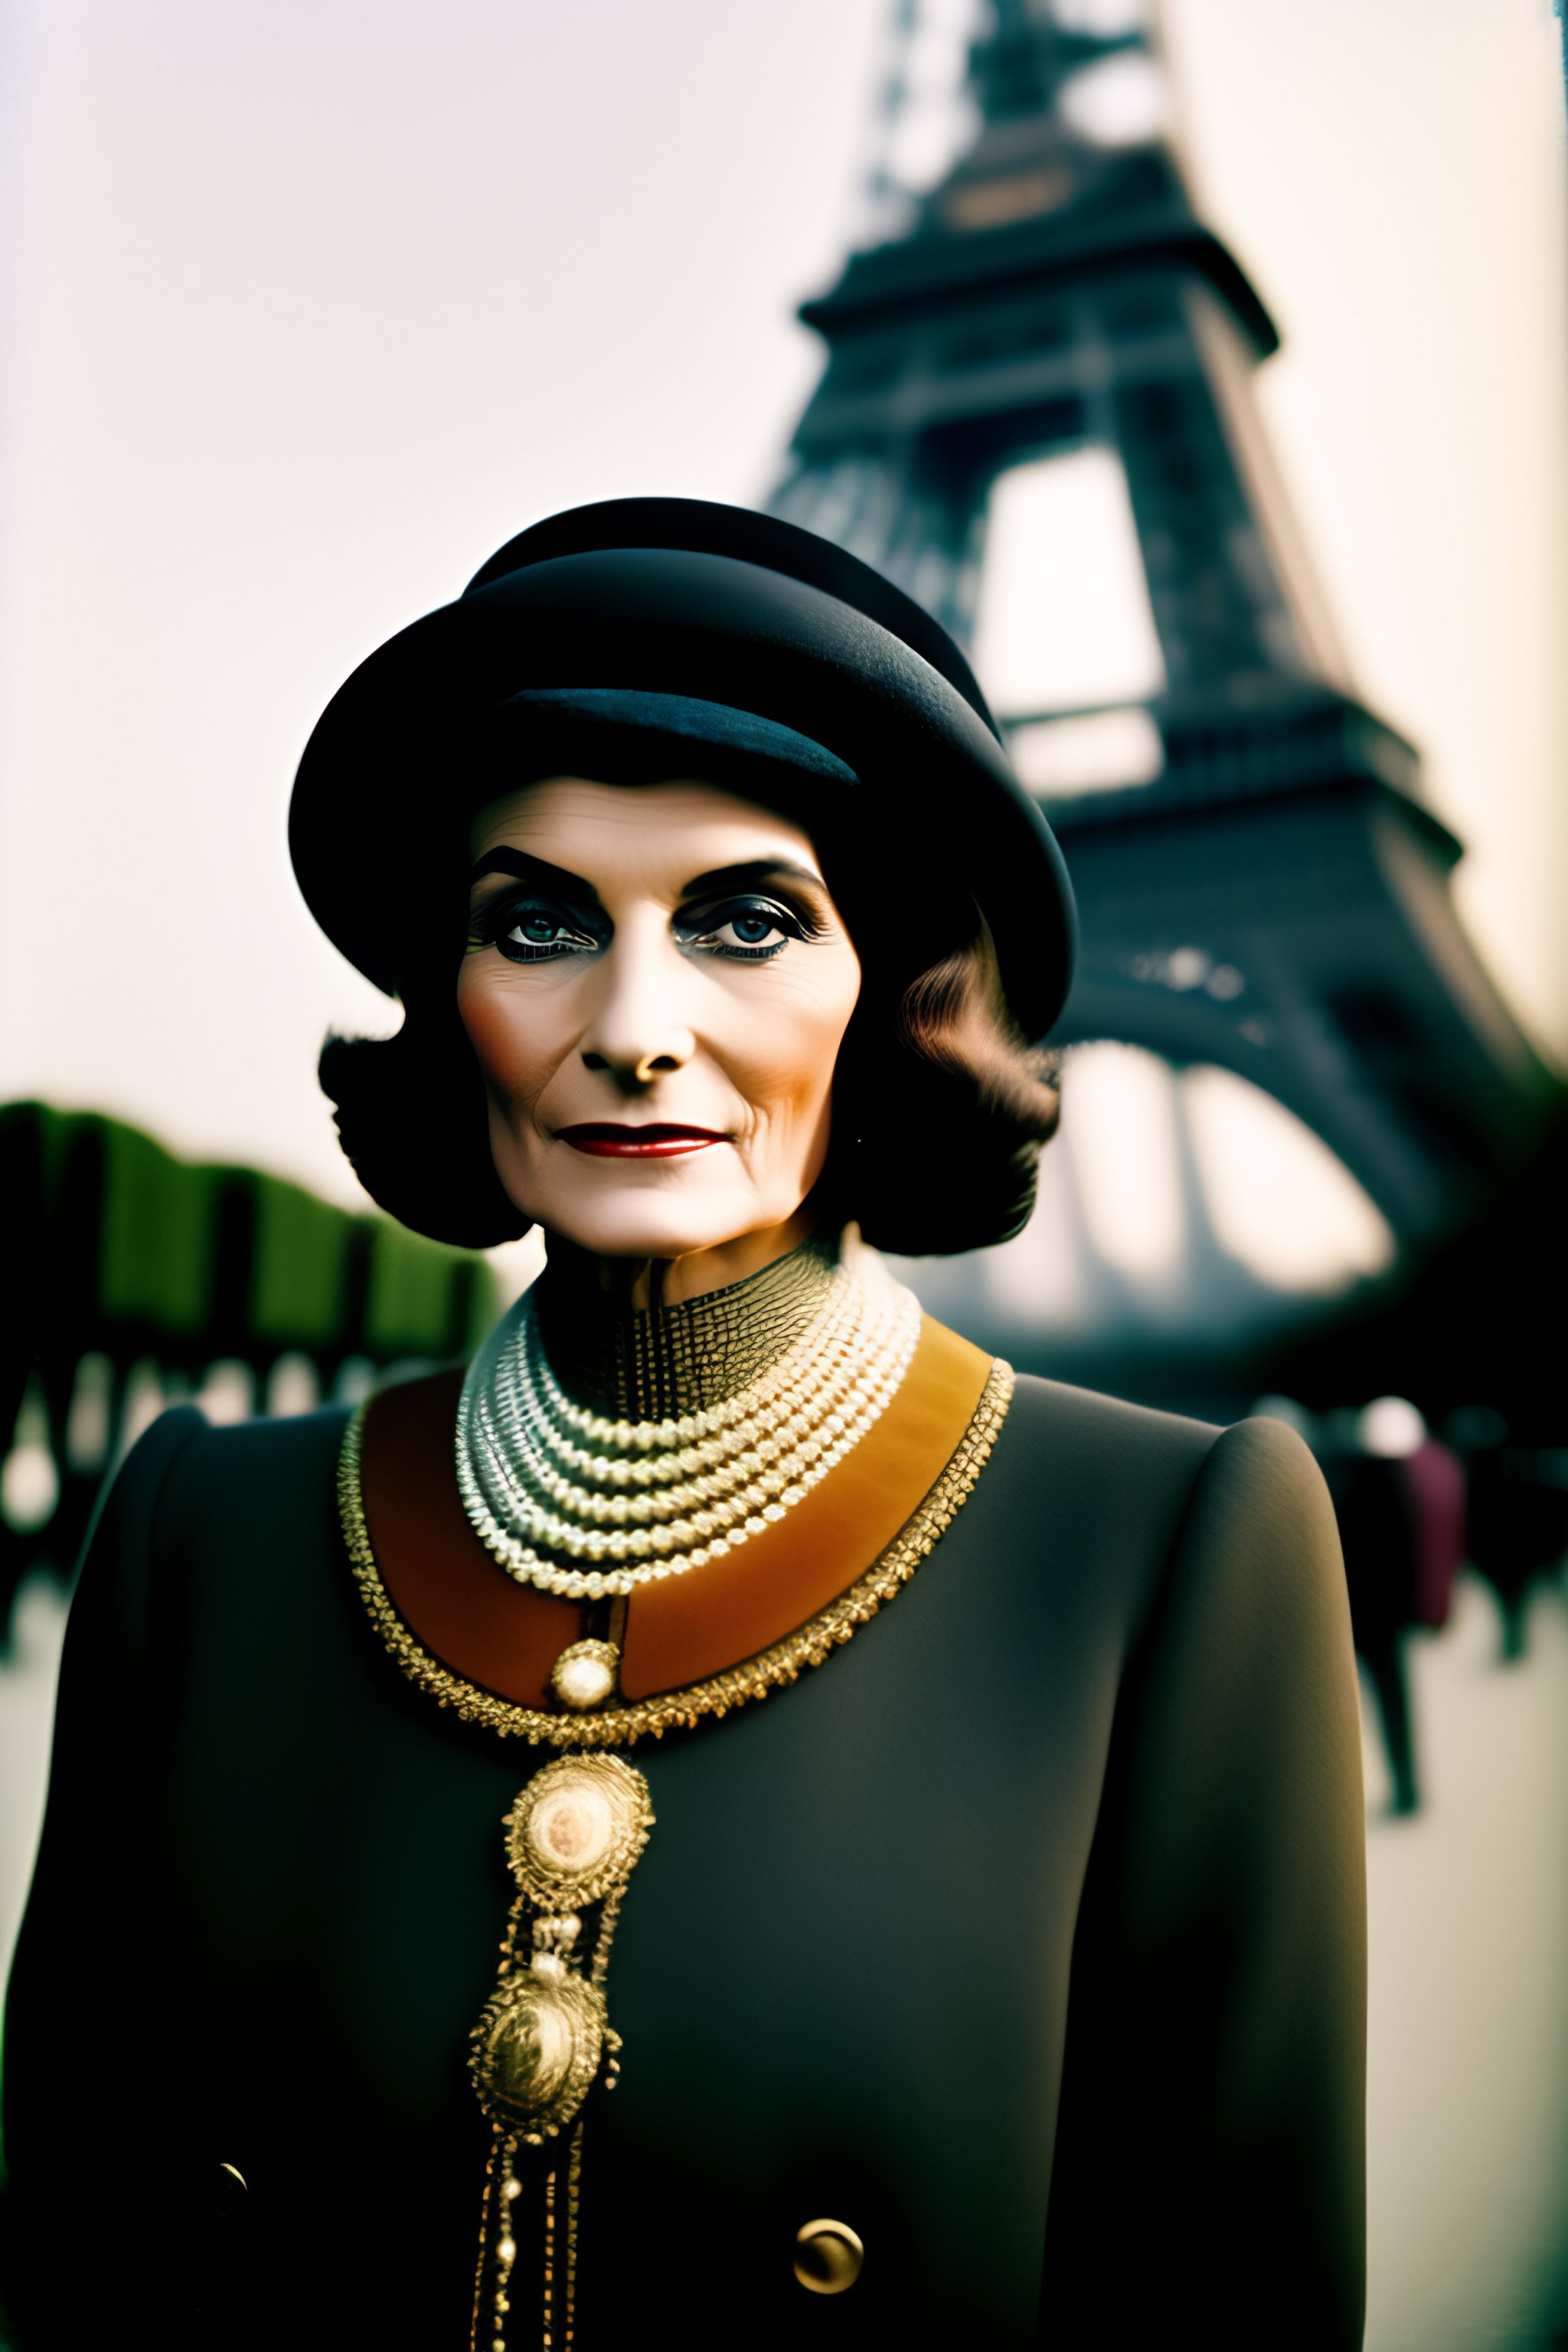 Lexica - Portrait of Coco Chanel in front of the Eiffel tower in Paris,  color polaroid, historic photo